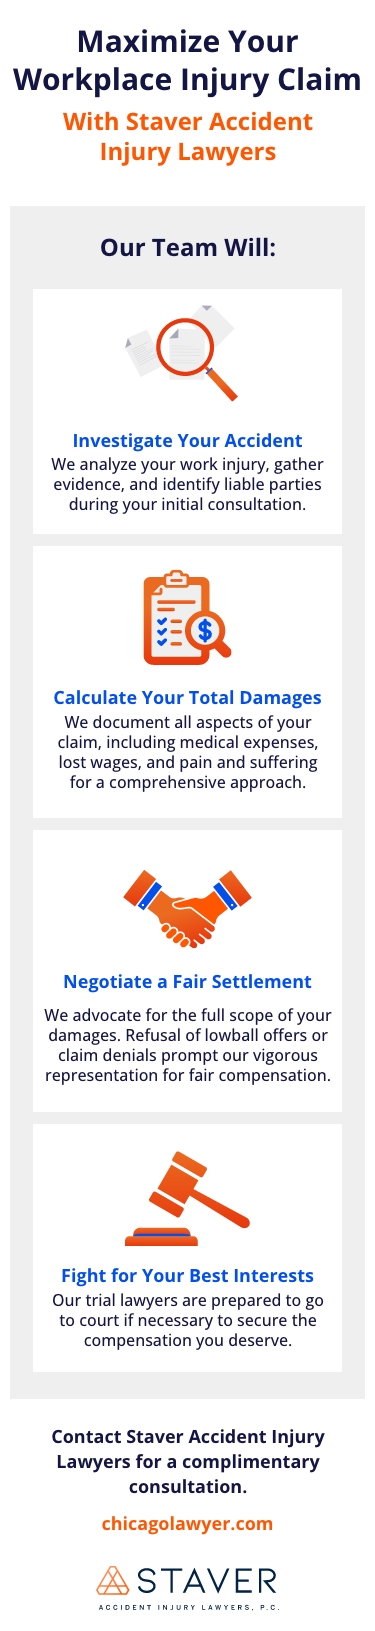 Infographic headline: Maximize your workplace injury claim with Staver Accident Injury Lawyers Our Team Will: [4 blocks with icons and descriptions below] Investigate Your Accident (icon of magnifying glass over papers) We analyze your work injury, gather evidence, and identify liable parties during your initial consultation. Calculate Your Total Damages (icon of a clipboard with checklist and money icon) We document all aspects of your claim, including medical expenses, lost wages, and pain and suffering for a comprehensive approach. Negotiate a Fair Settlement (Icon of handshake) We advocate for the full scope of your damages. Refusal of lowball offers or claim denials prompt our vigorous representation for fair compensation. Fight for Your Best Interests (Icon of judge gavel) Our trial lawyers are prepared to go to court if necessary to secure the compensation you deserve. Contact Staver Accident Injury Lawyers for a complimentary consultation. Chicagolawyer.com